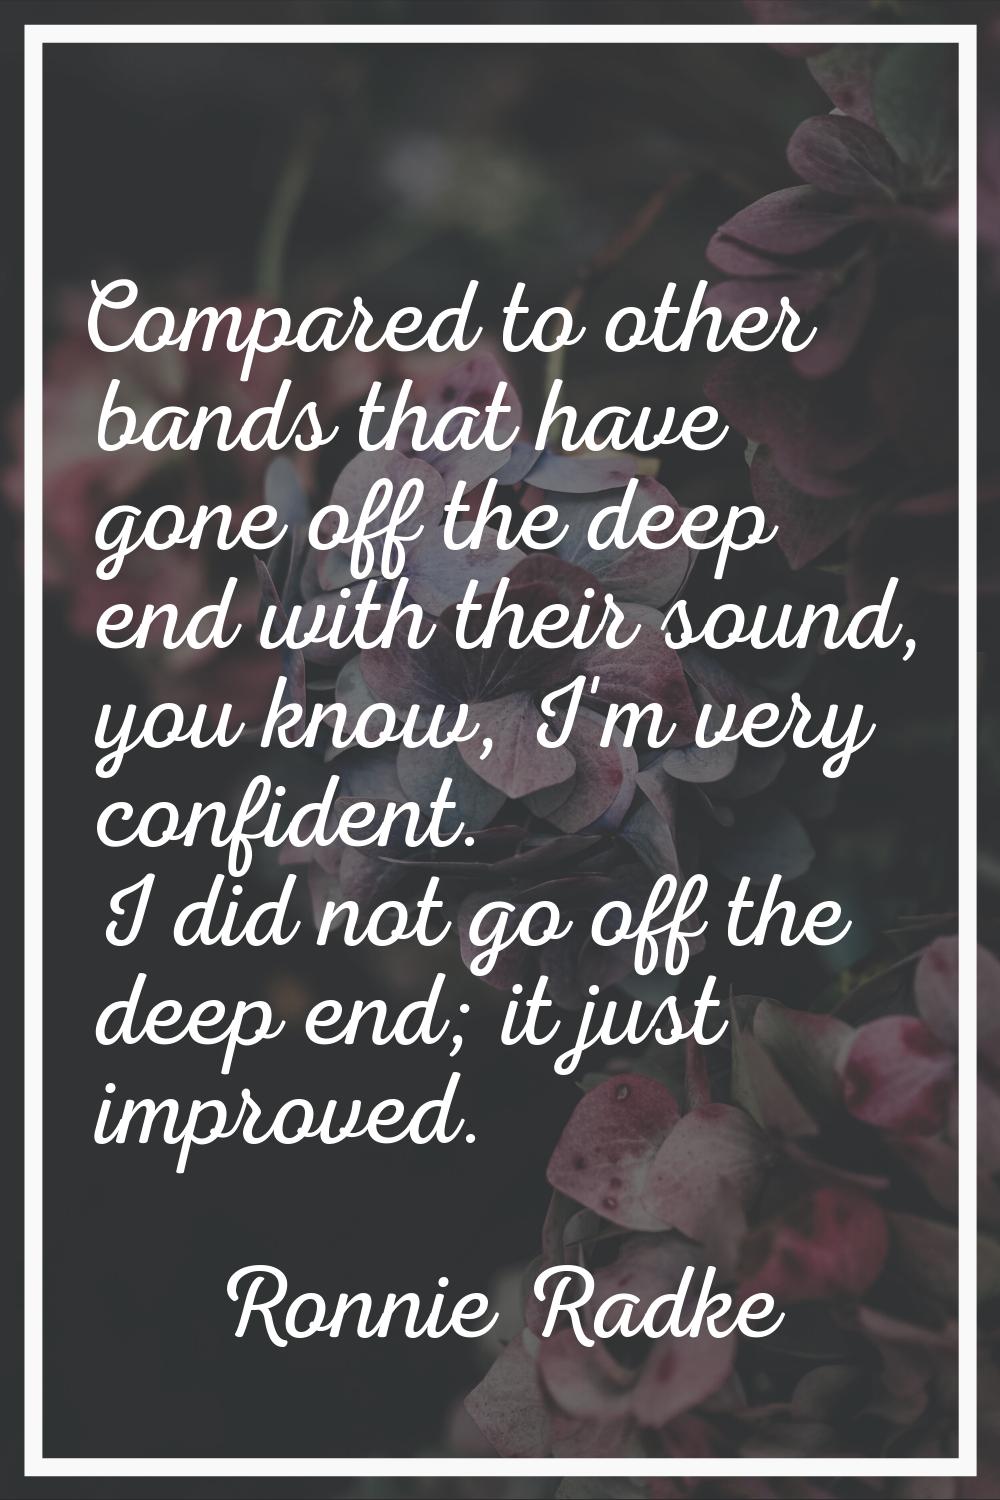 Compared to other bands that have gone off the deep end with their sound, you know, I'm very confid